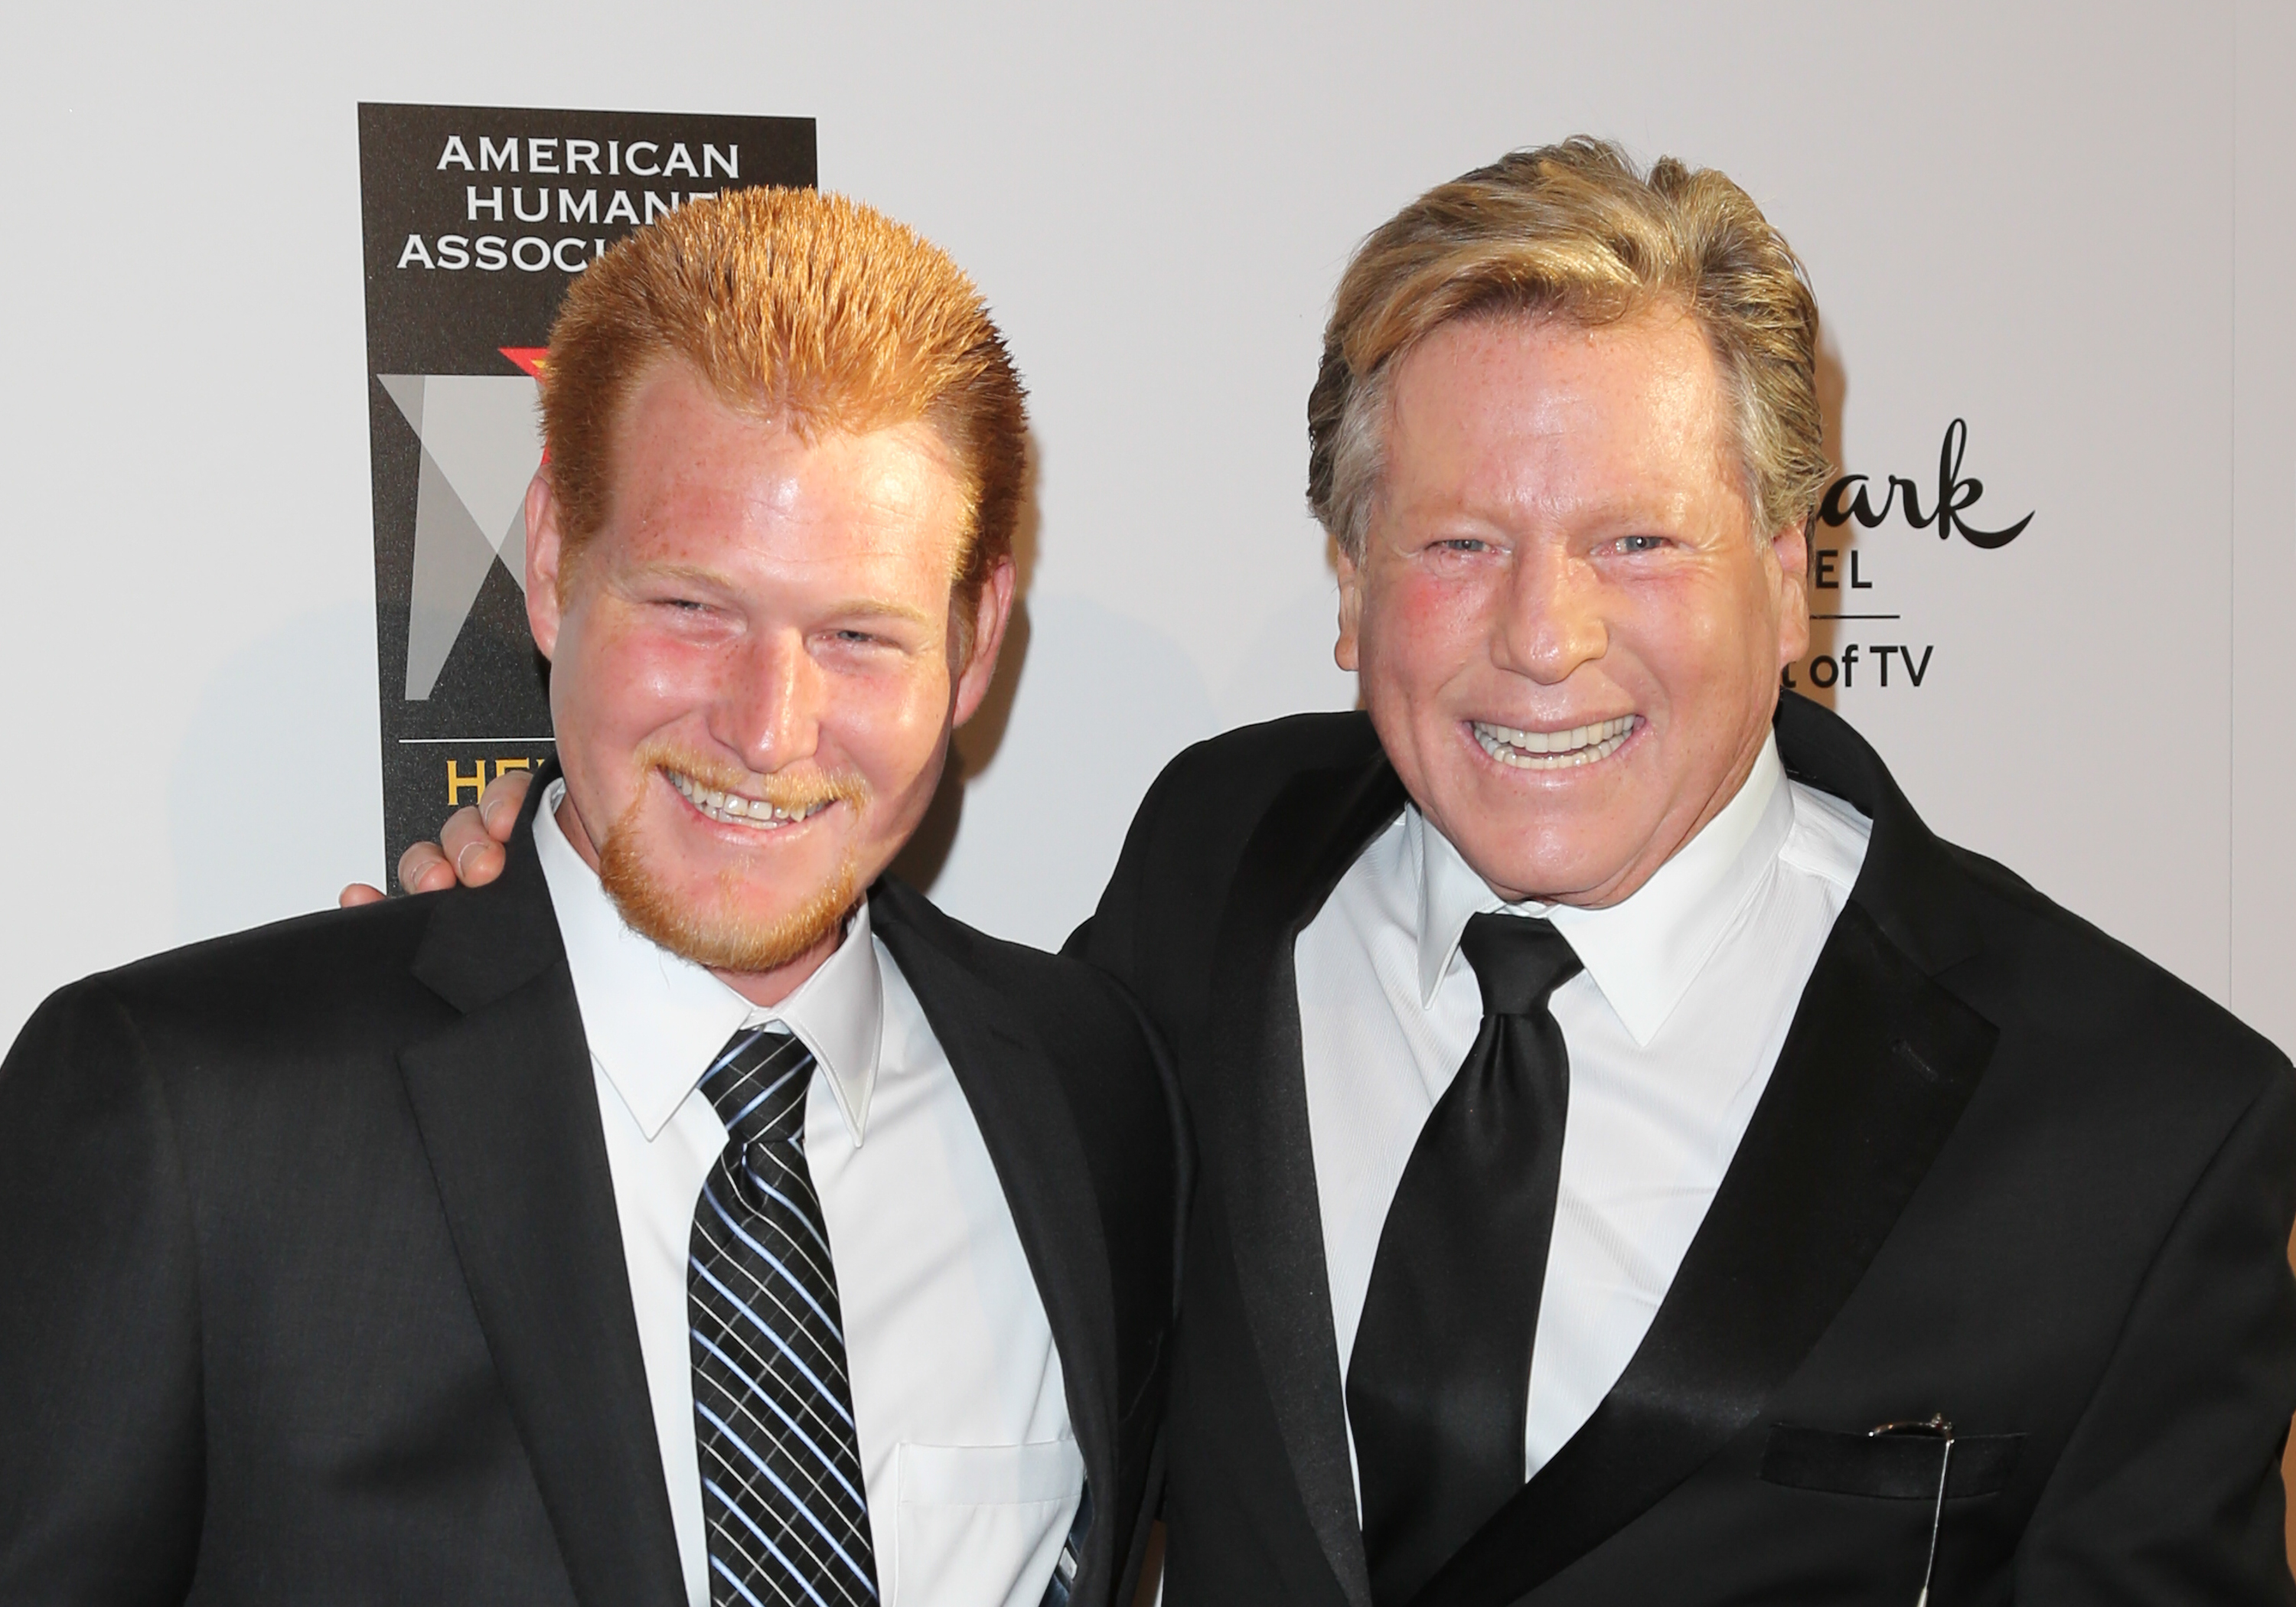 Redmond O'Neal et Ryan O'Neal le 5 octobre 2013 à Beverly Hills, Californie | Source : Getty Images